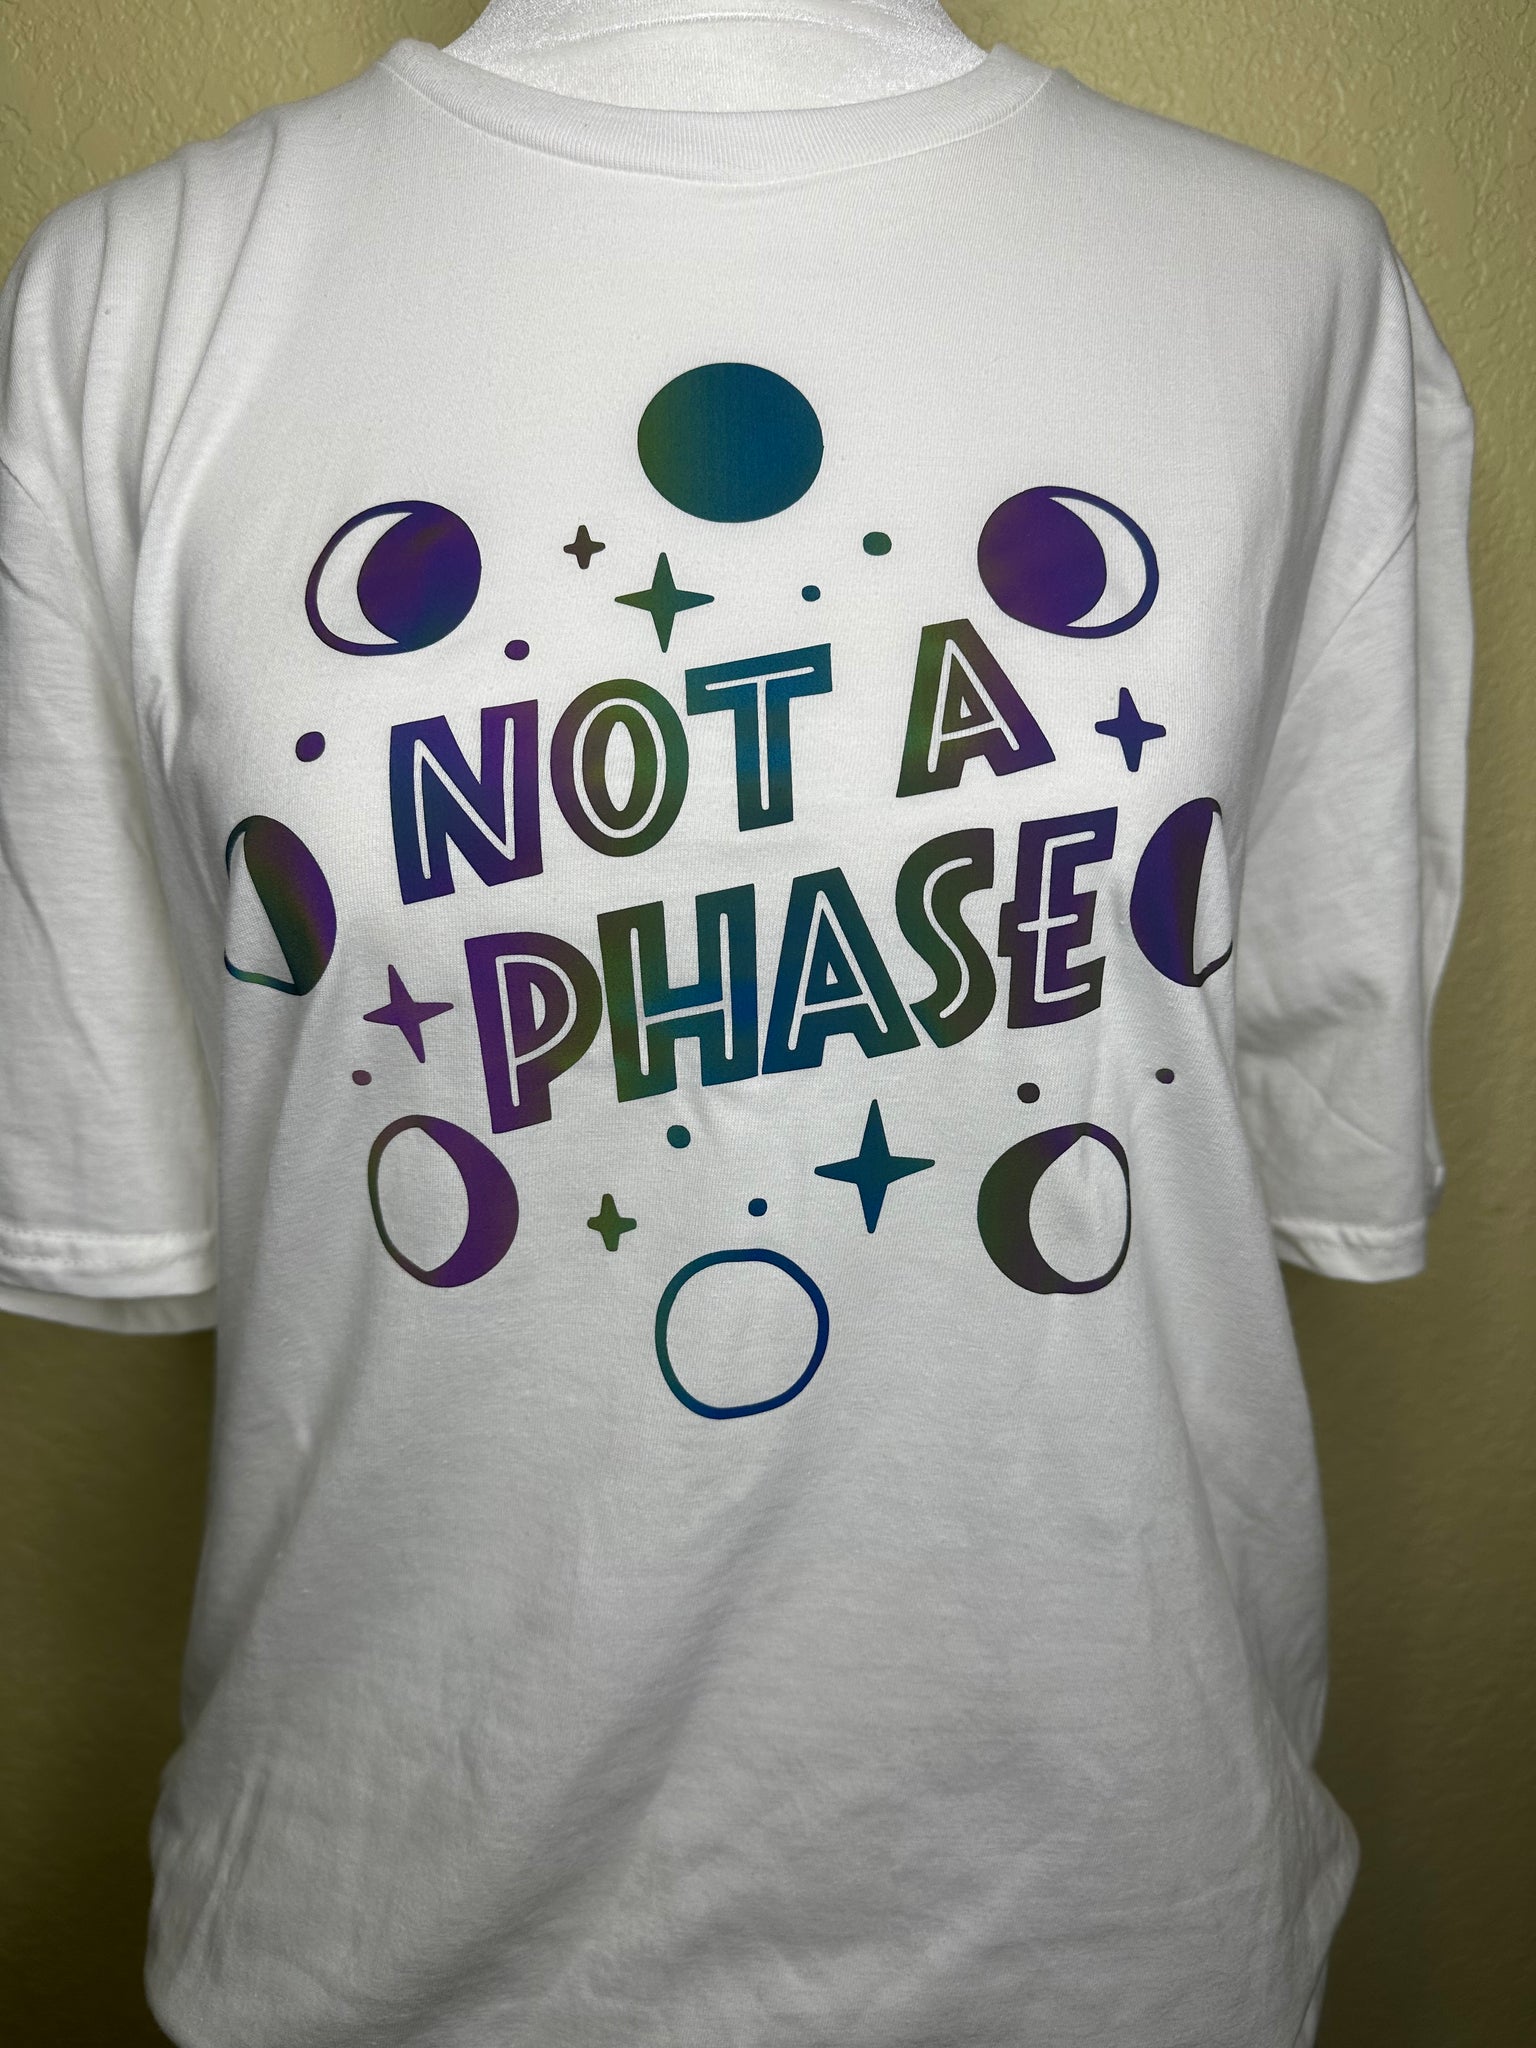 Not a Phase Shirt